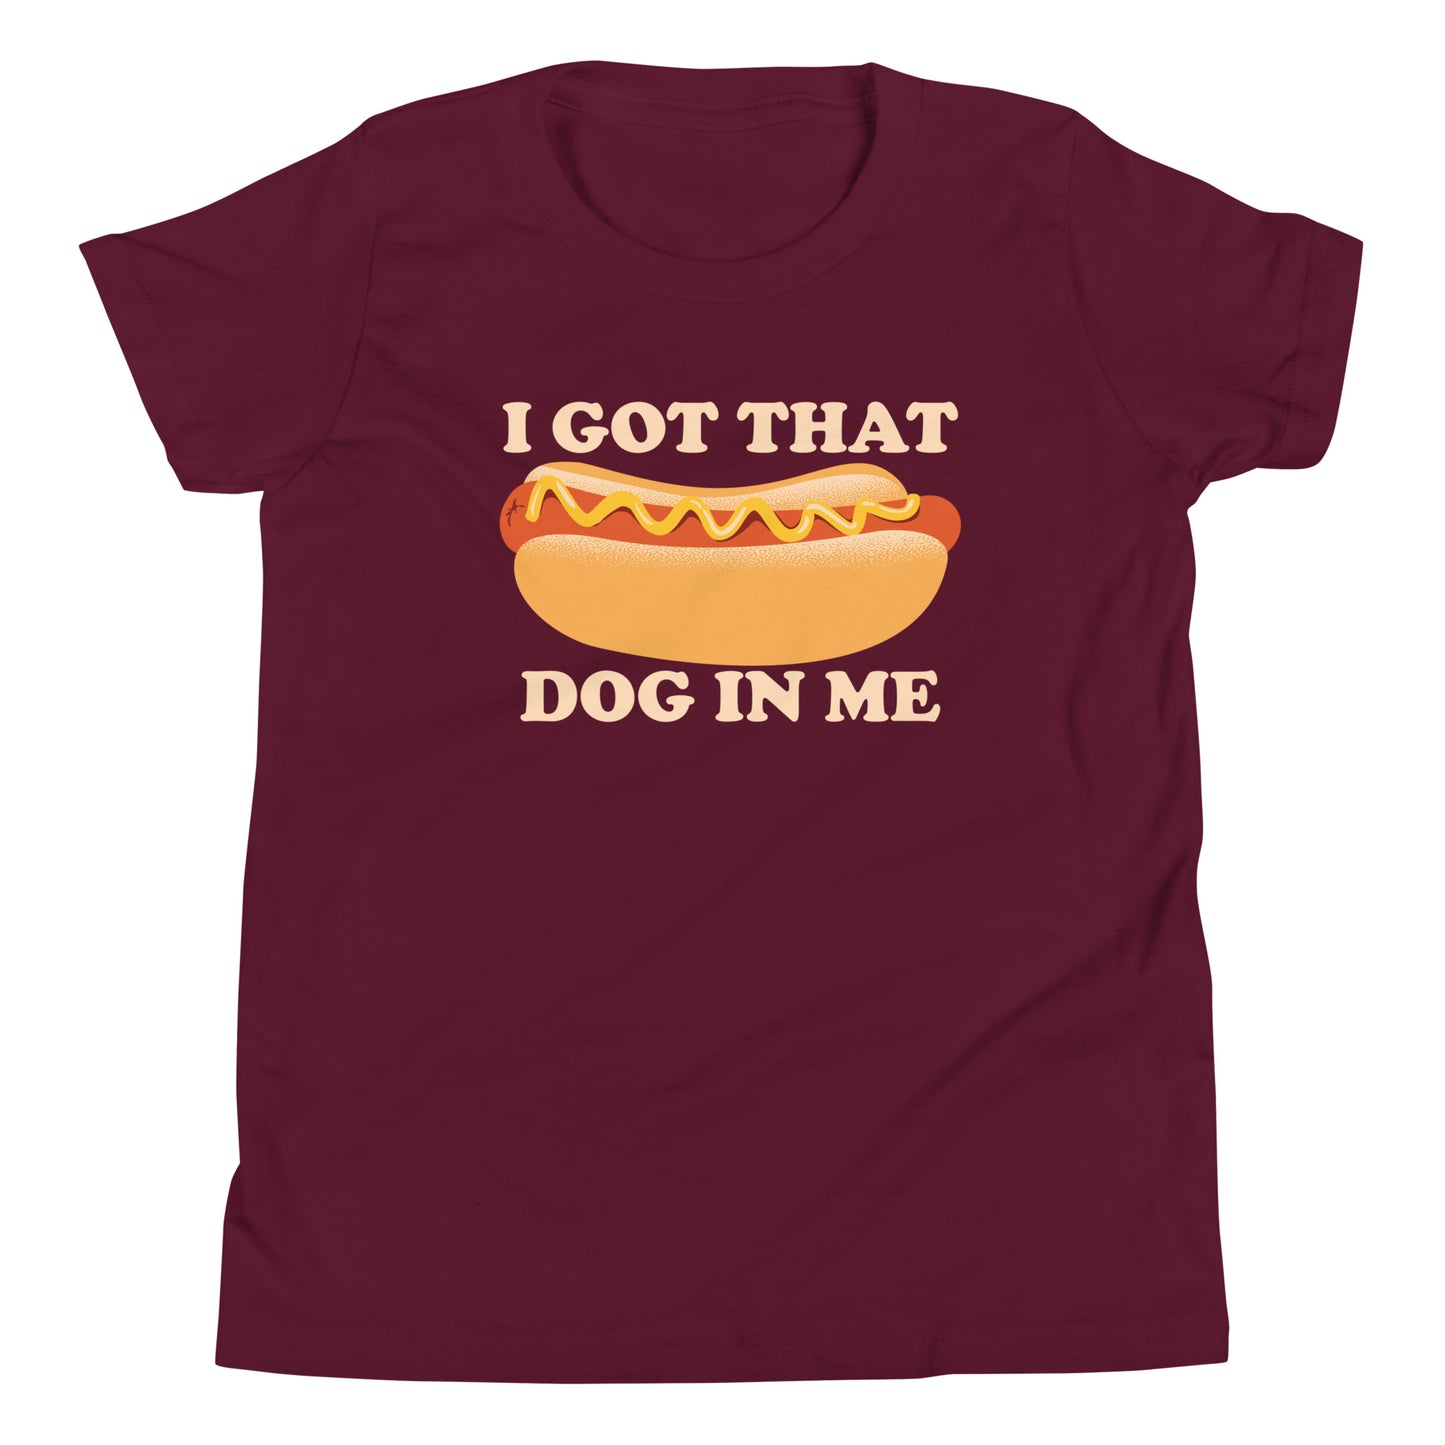 I Got That Dog In Me Kid's Youth Tee